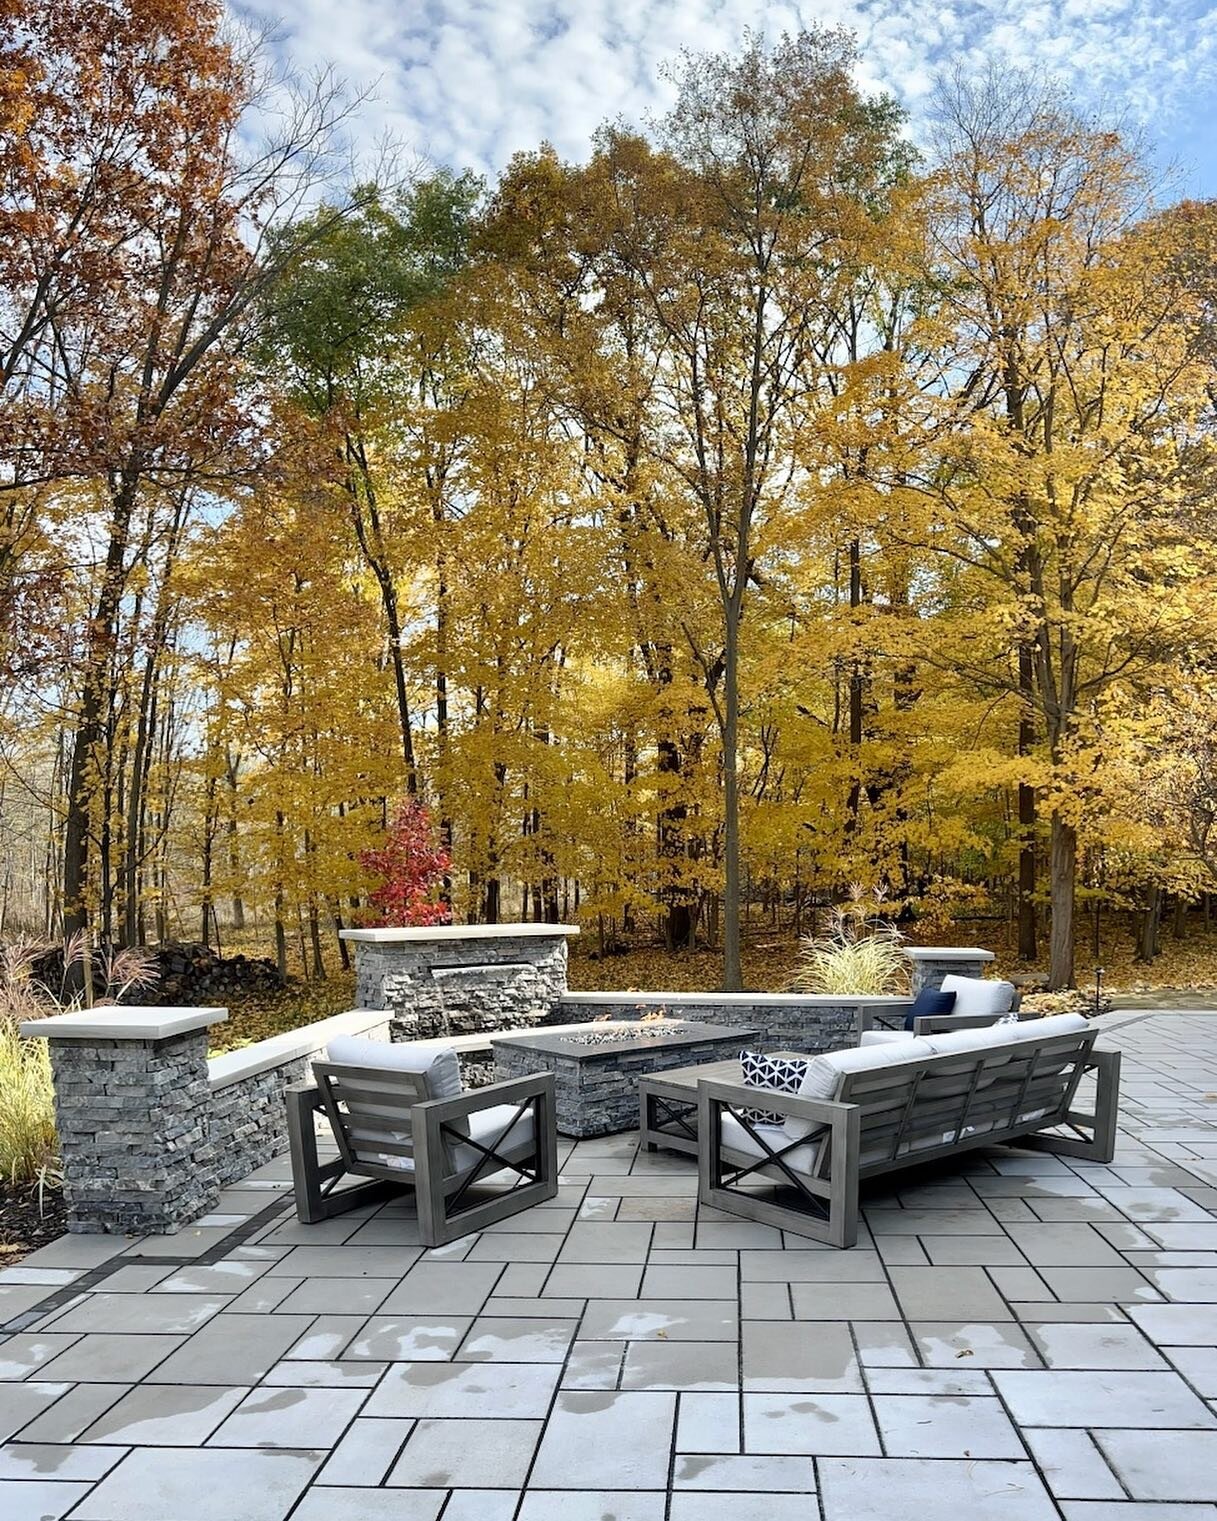 Now THAT was a perfect fall weekend 🍁

#fall #outdoorliving #waterfeature #firefeature #landscapedesign #landscaping #hardscaping #patio